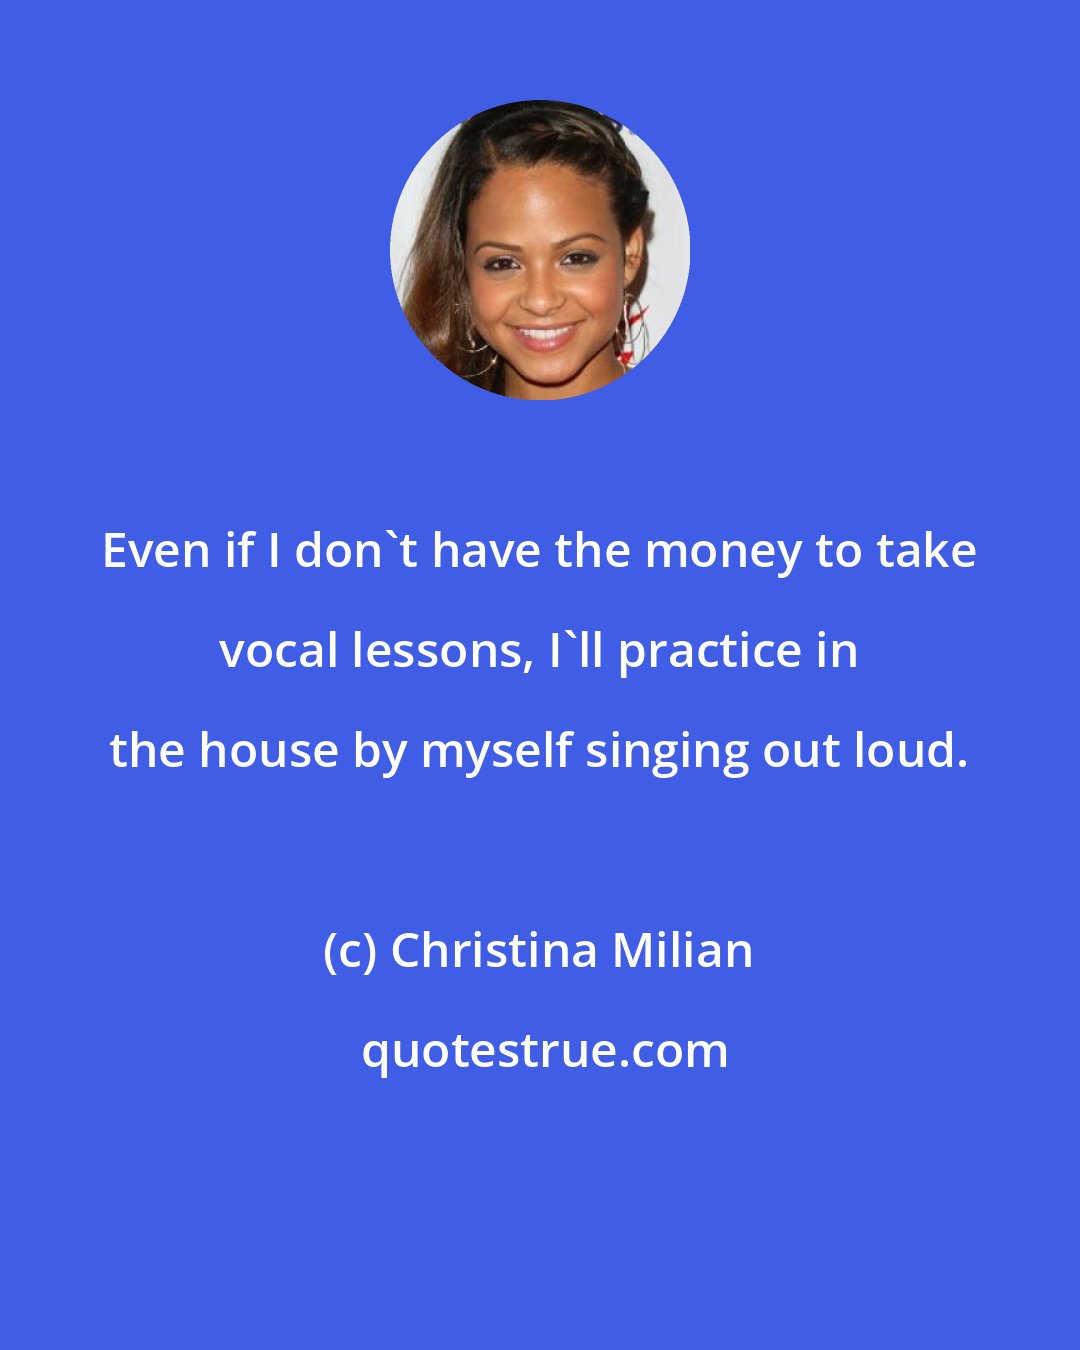 Christina Milian: Even if I don't have the money to take vocal lessons, I'll practice in the house by myself singing out loud.